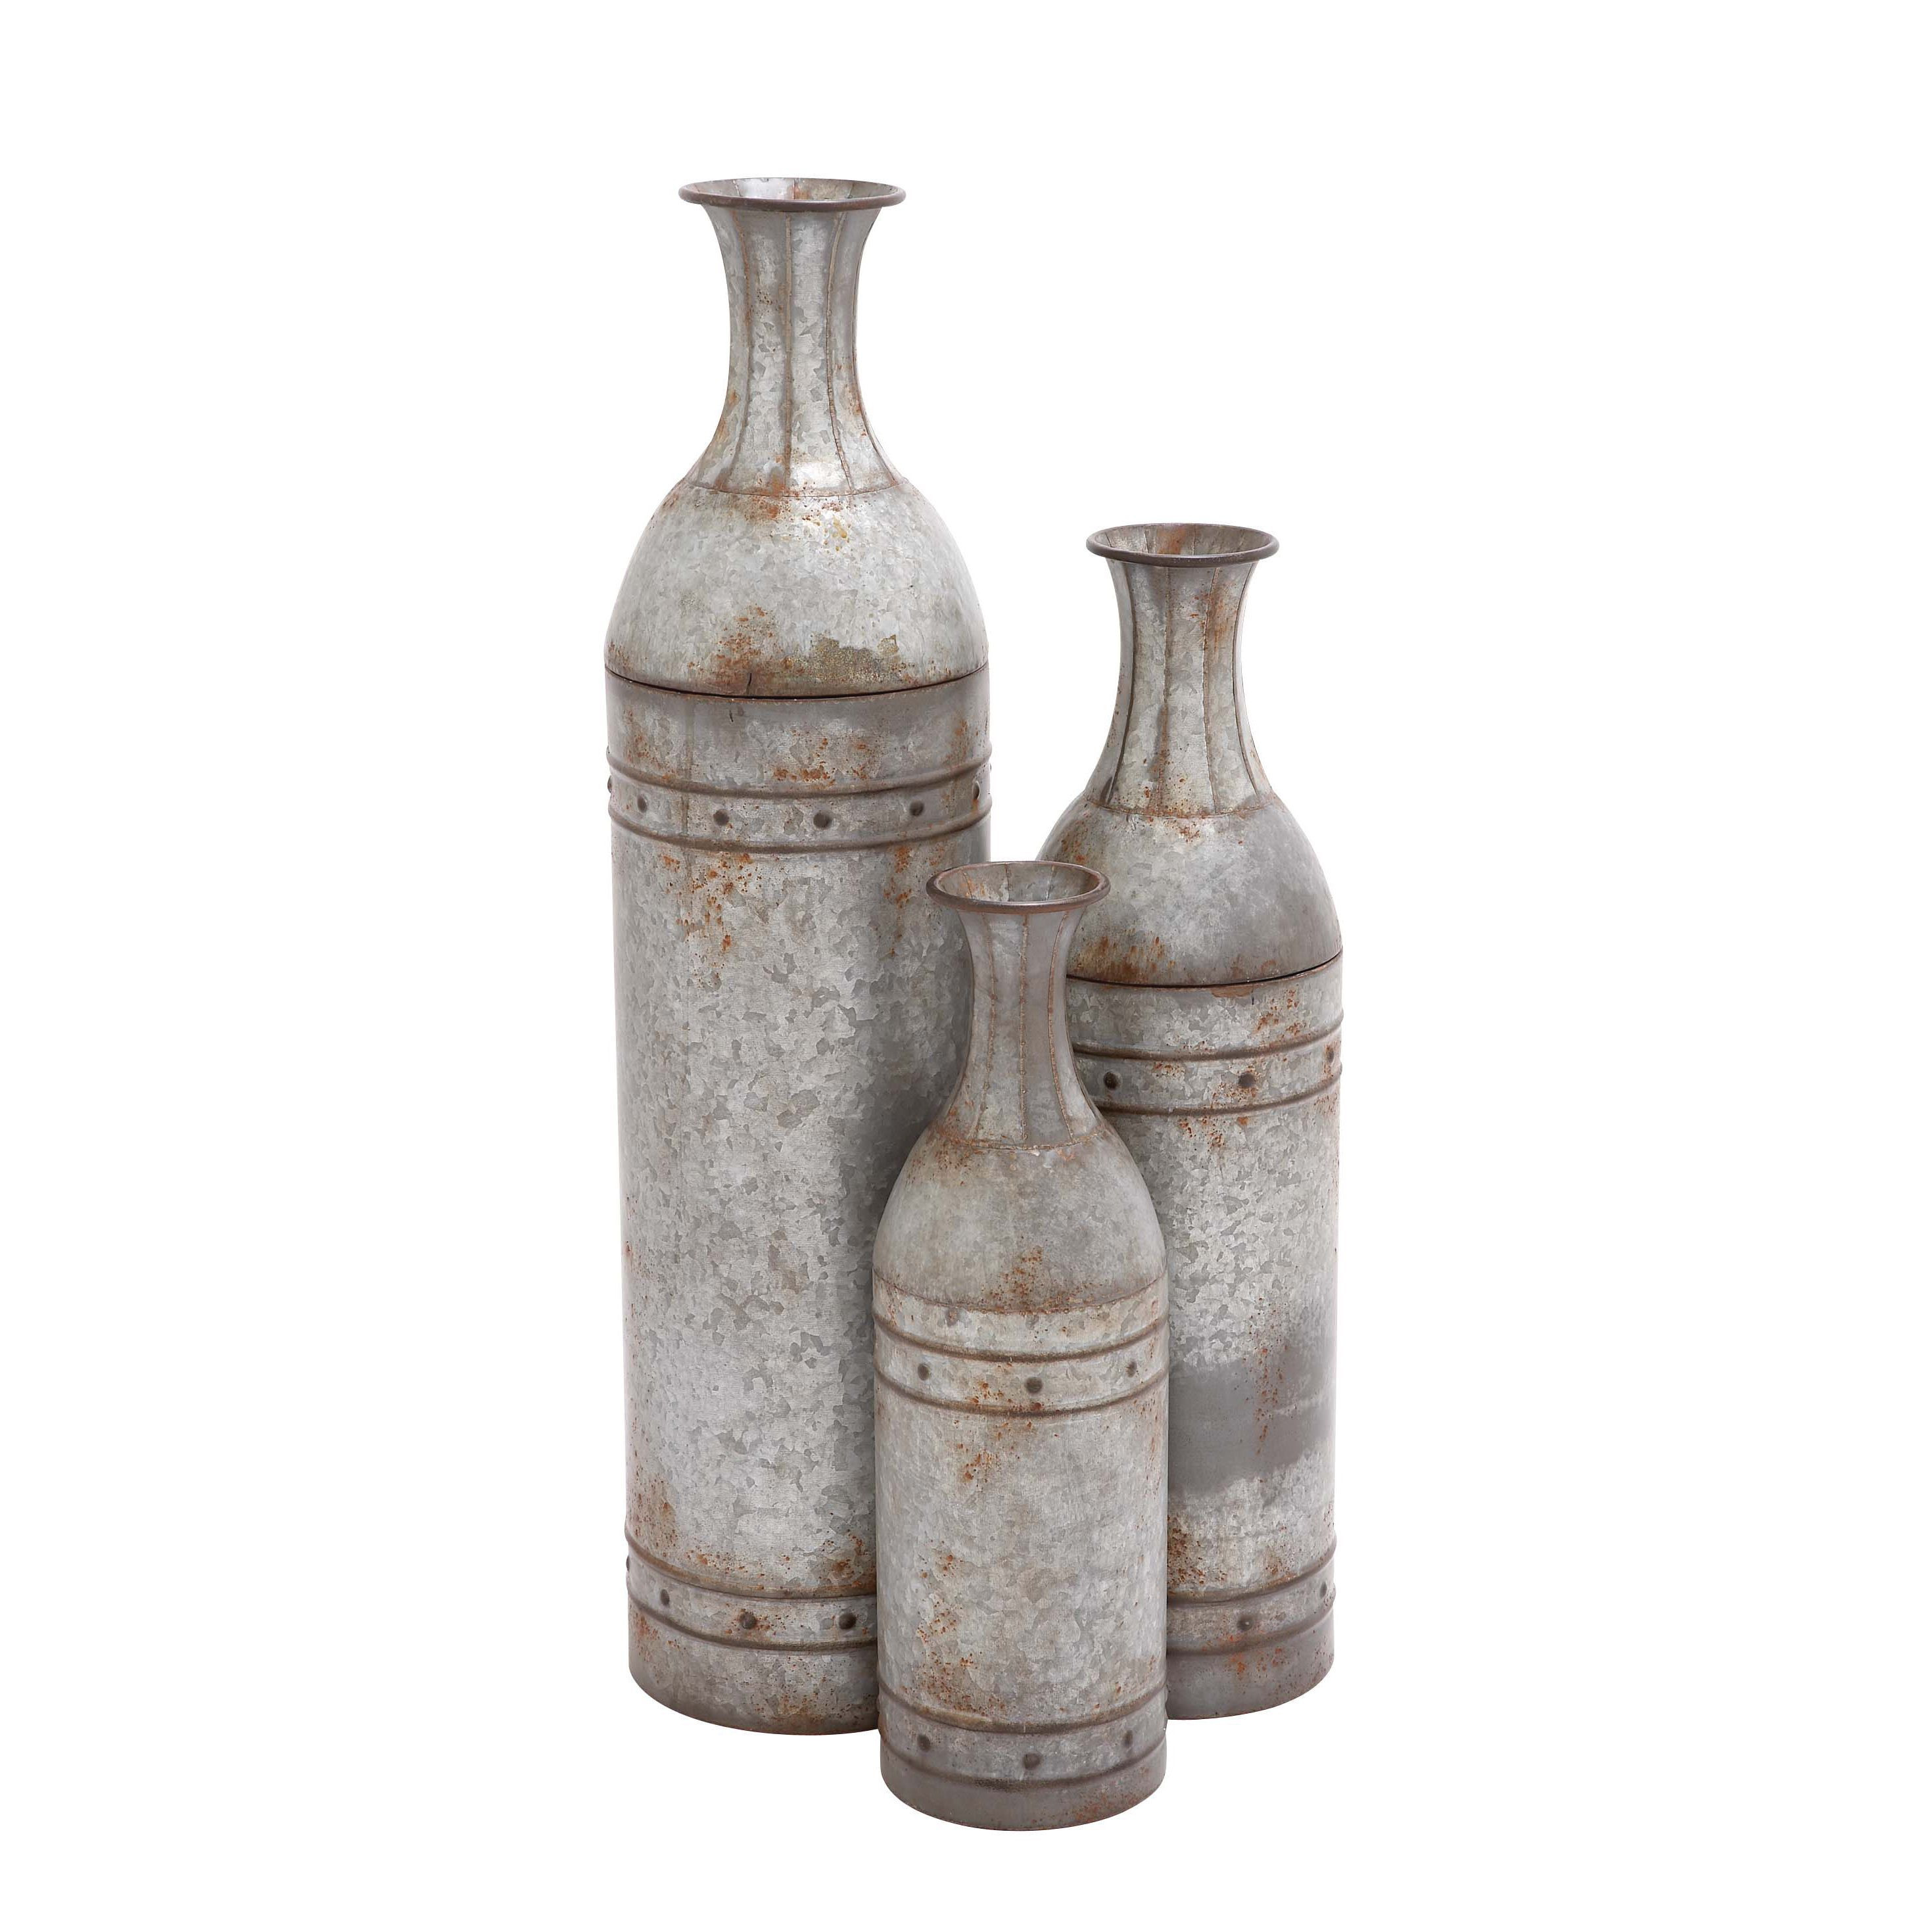 26 Cute Square Vases Set Of 3 2022 free download square vases set of 3 of studio 350 metal cylinder vase set of 3 grey iron products intended for studio 350 metal cylinder vase set of 3 grey iron